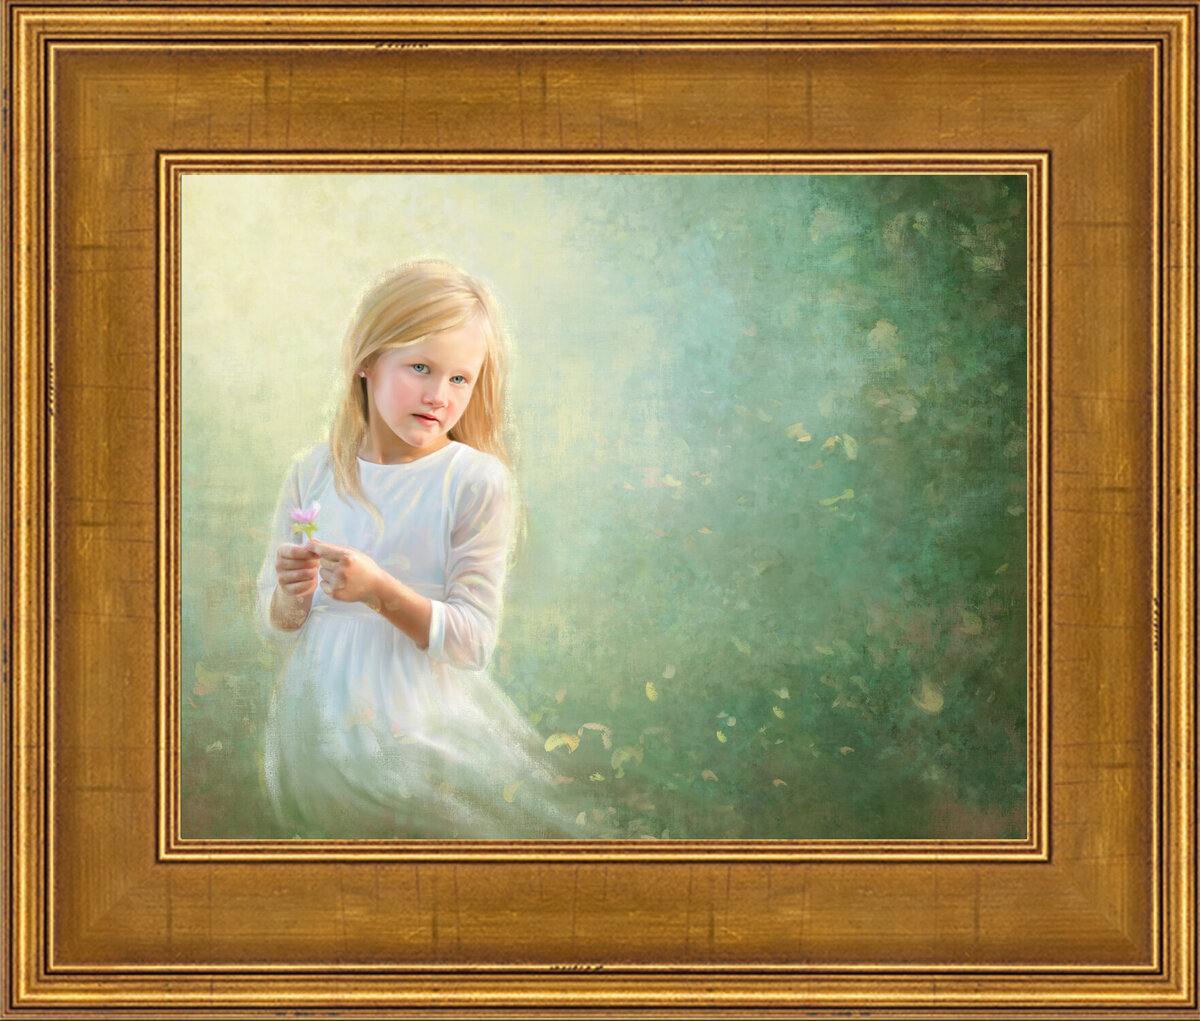 Painted girl in photoshop, framed in gold frame.